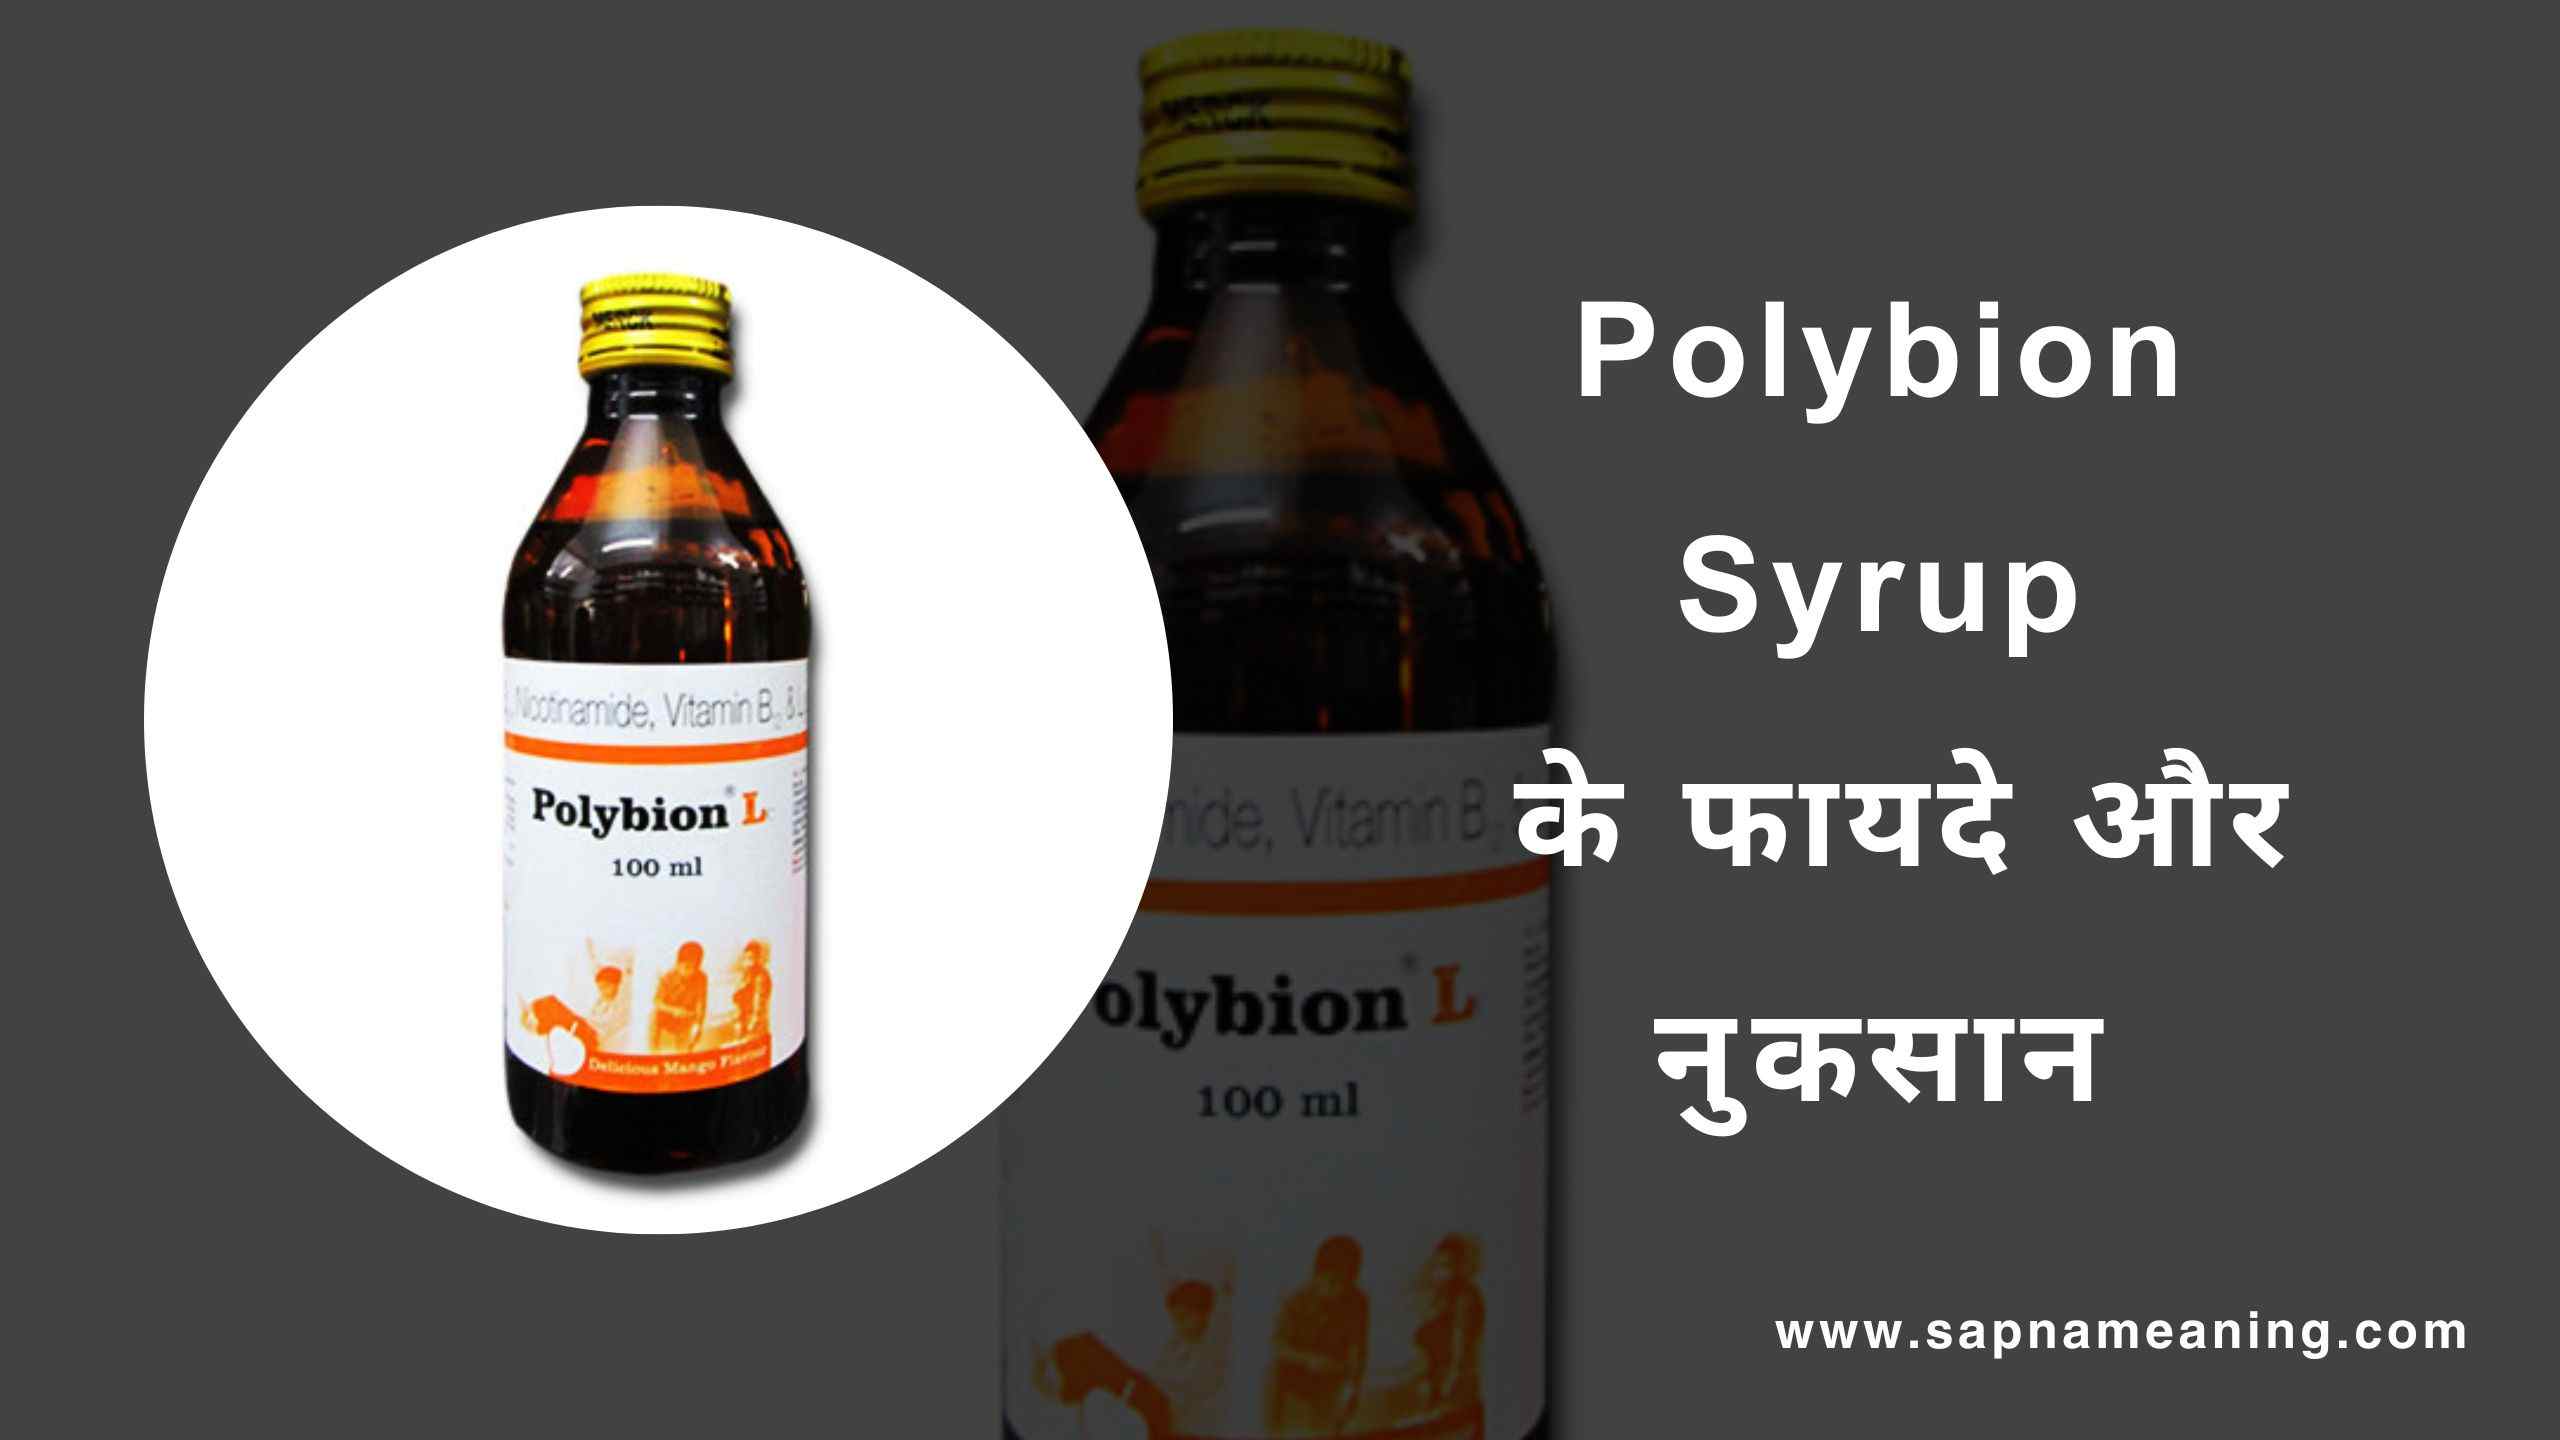 Polybion Syrup Uses in Hindi